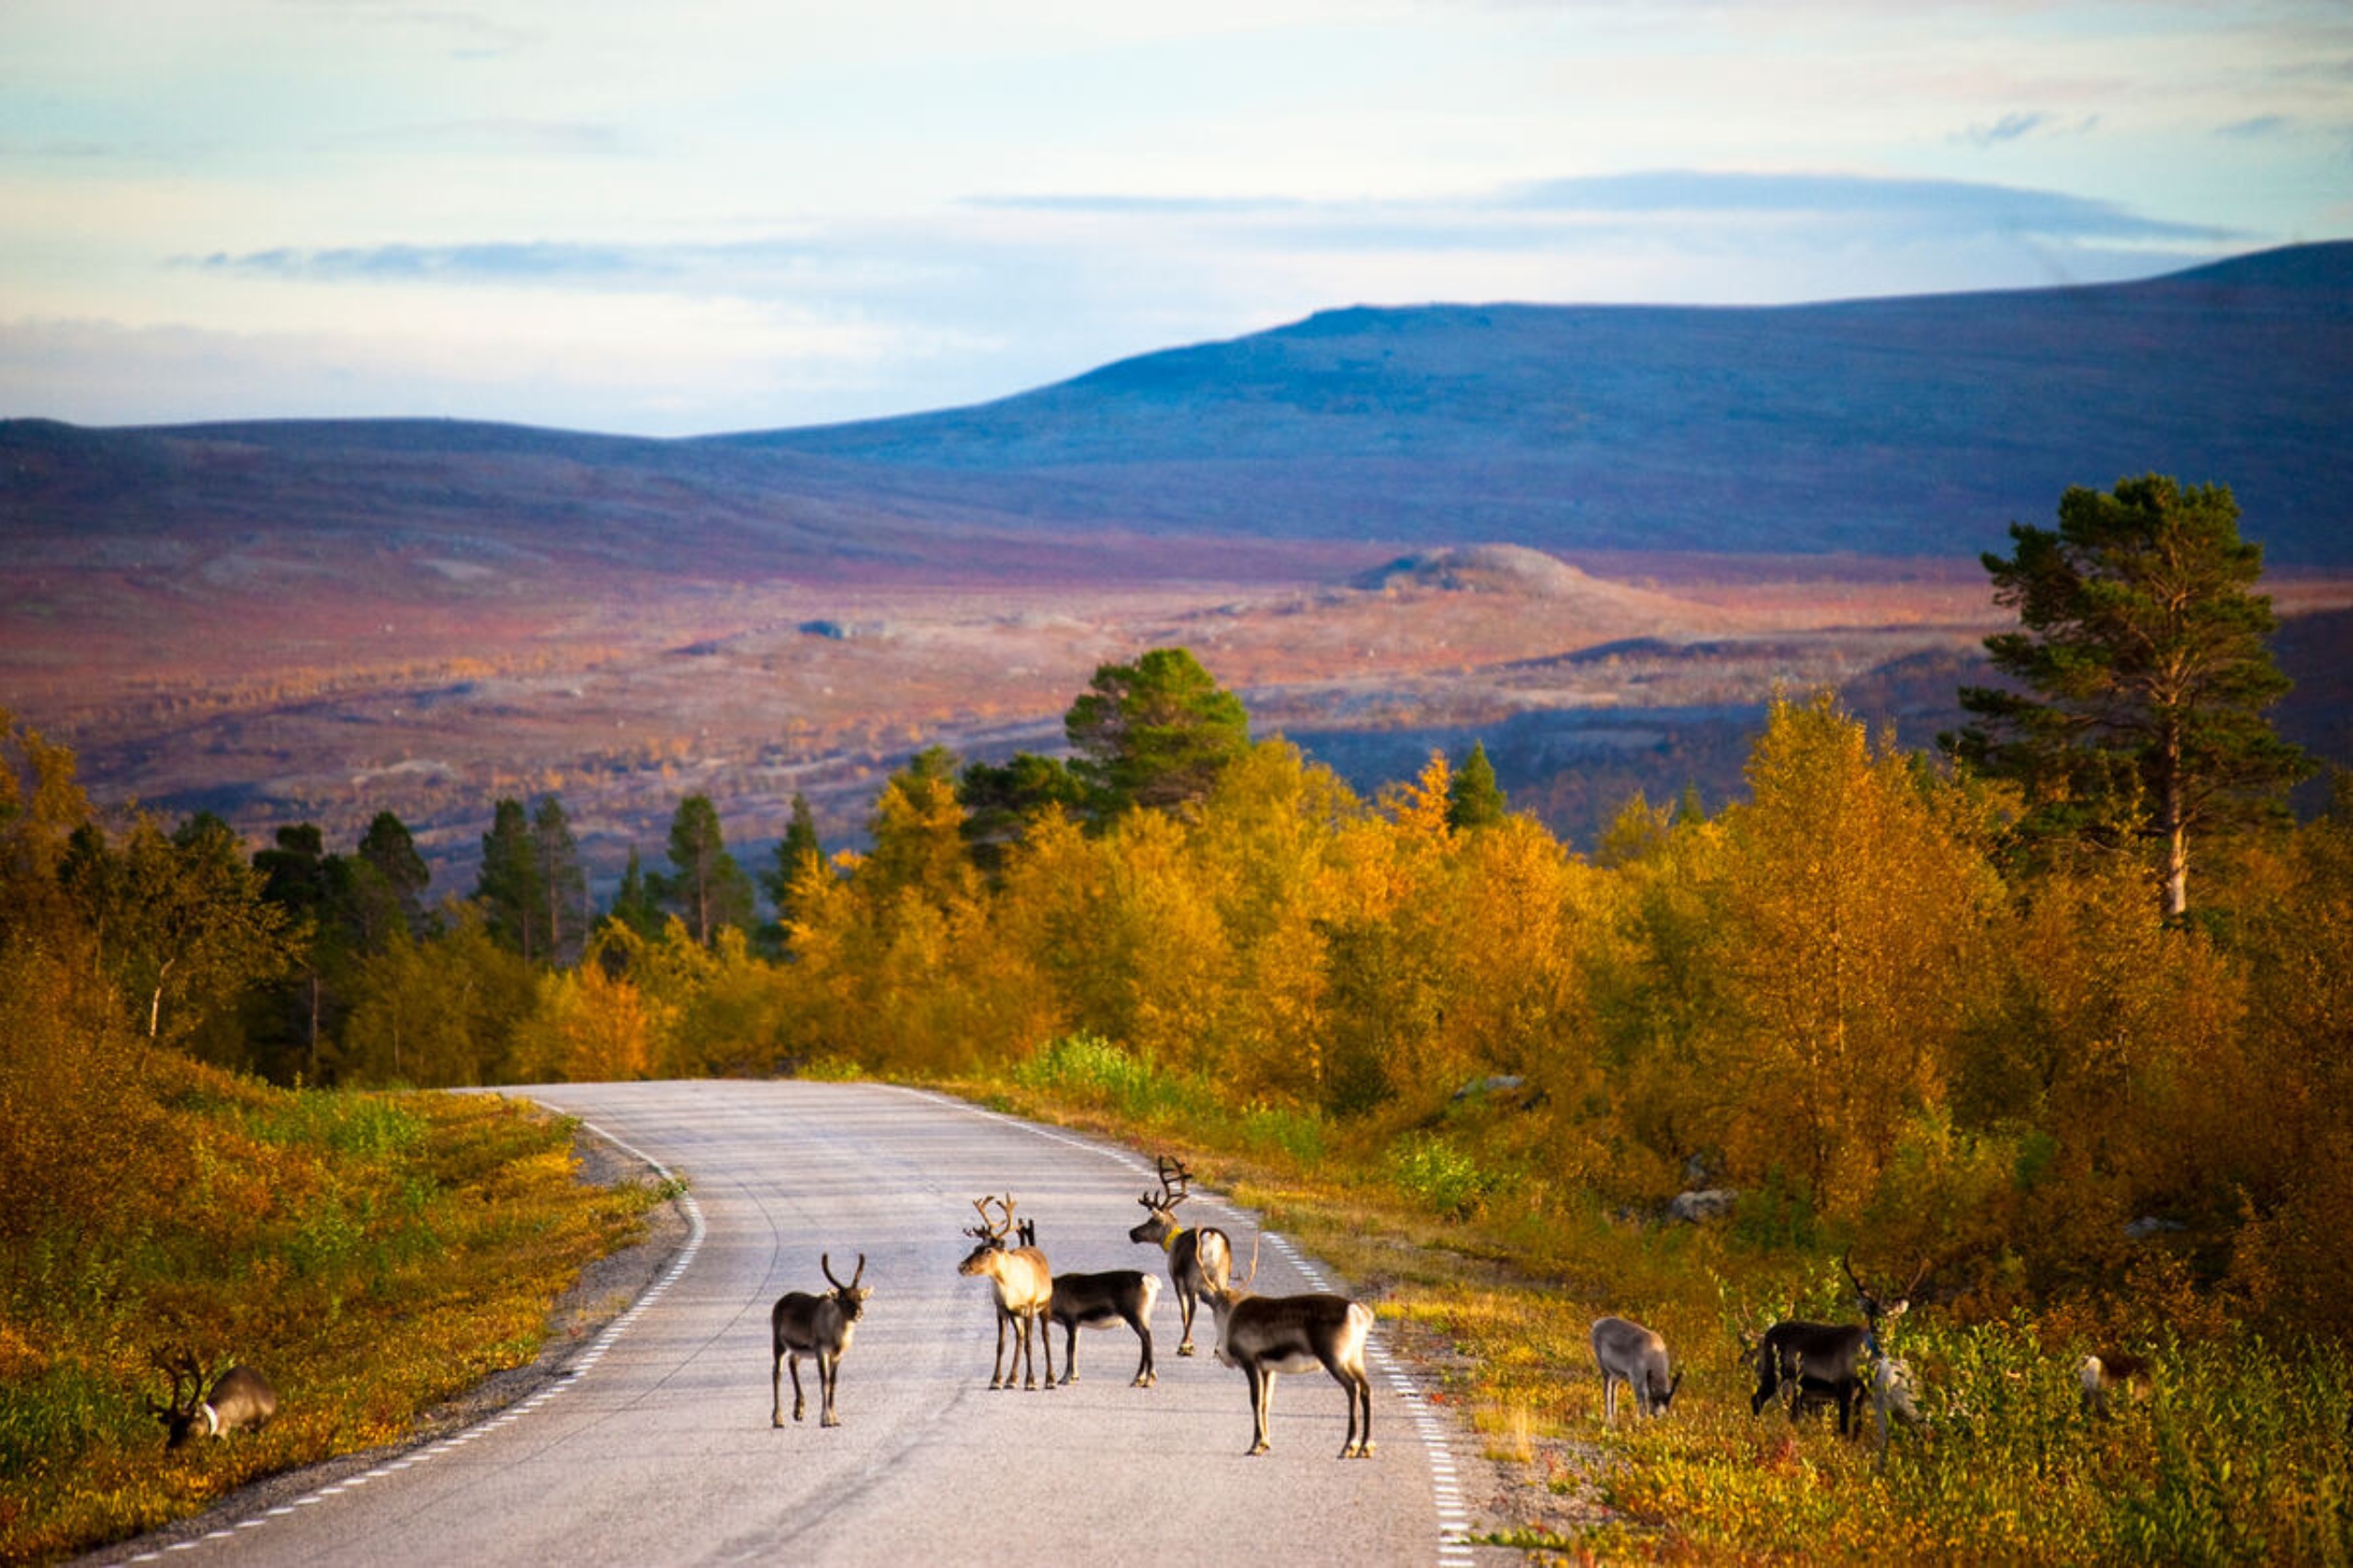 Reindeer are part of the traffic in Finland. Make sure you drive carefully. 